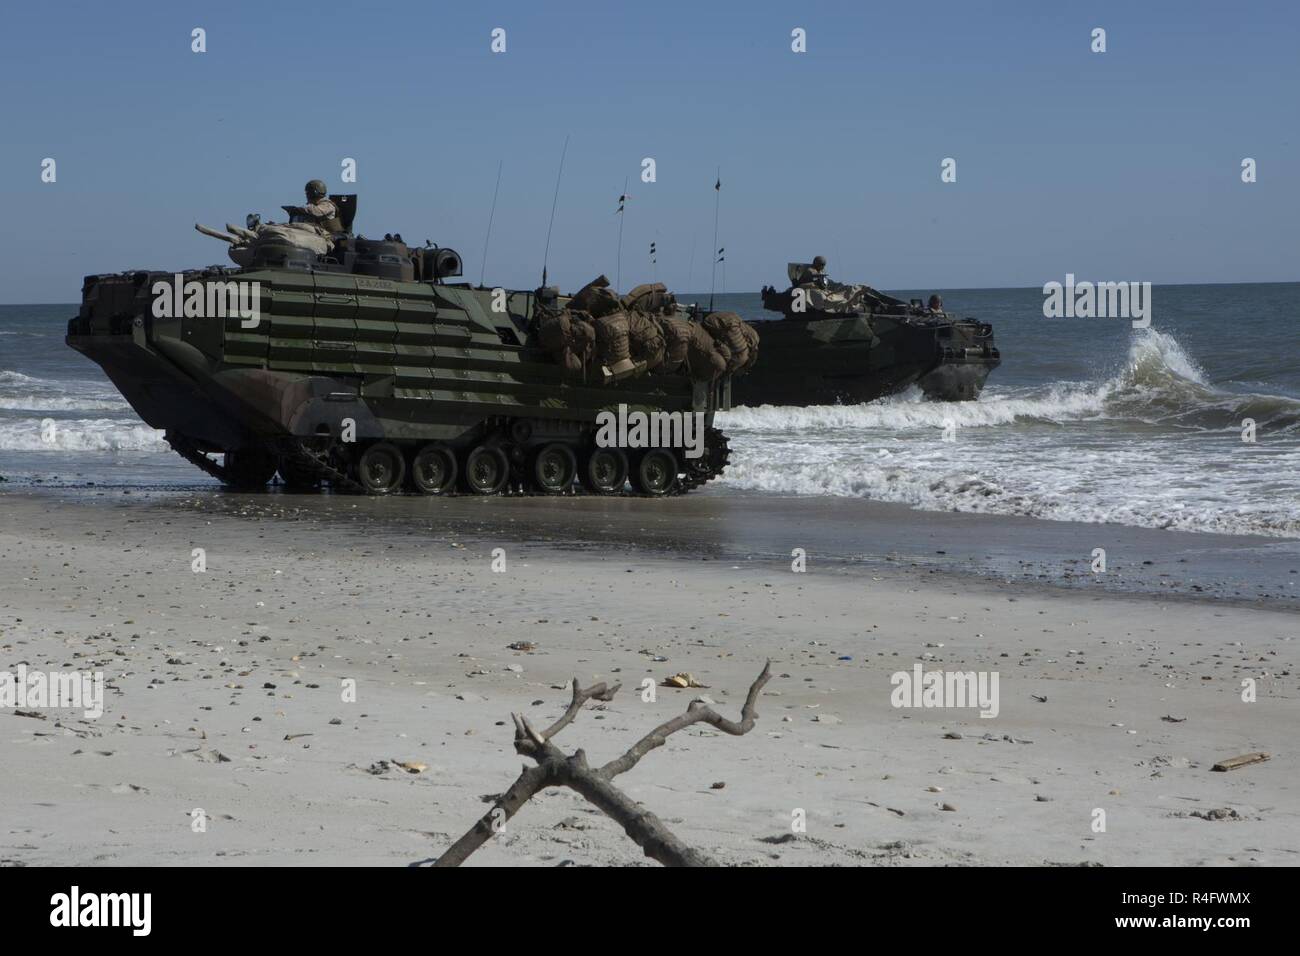 U.S. Marines with 2nd Assault Amphibian Battalion, 2nd Marine Division, (2d MARDIV), maneuver Assault Amphibious Vehicles (AAV-7A1) during an amphibious movement as part of Marine Corps Combat Readiness Evaluation, (MCCRE), Camp Lejeune, N.C., Oct. 24, 2016. MCCRE is a pre-deployment training evaluation designed to test the skills of Marines and Sailors with possible combat scenarios. Stock Photo